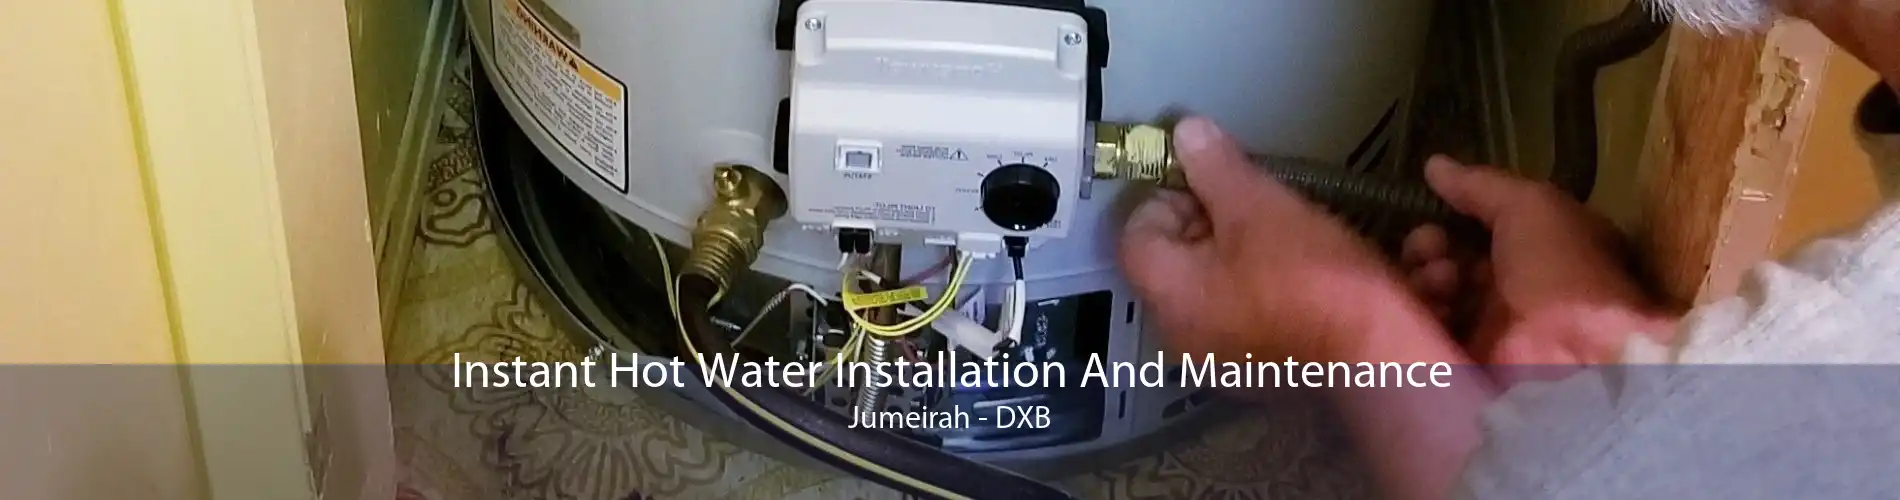 Instant Hot Water Installation And Maintenance Jumeirah - DXB